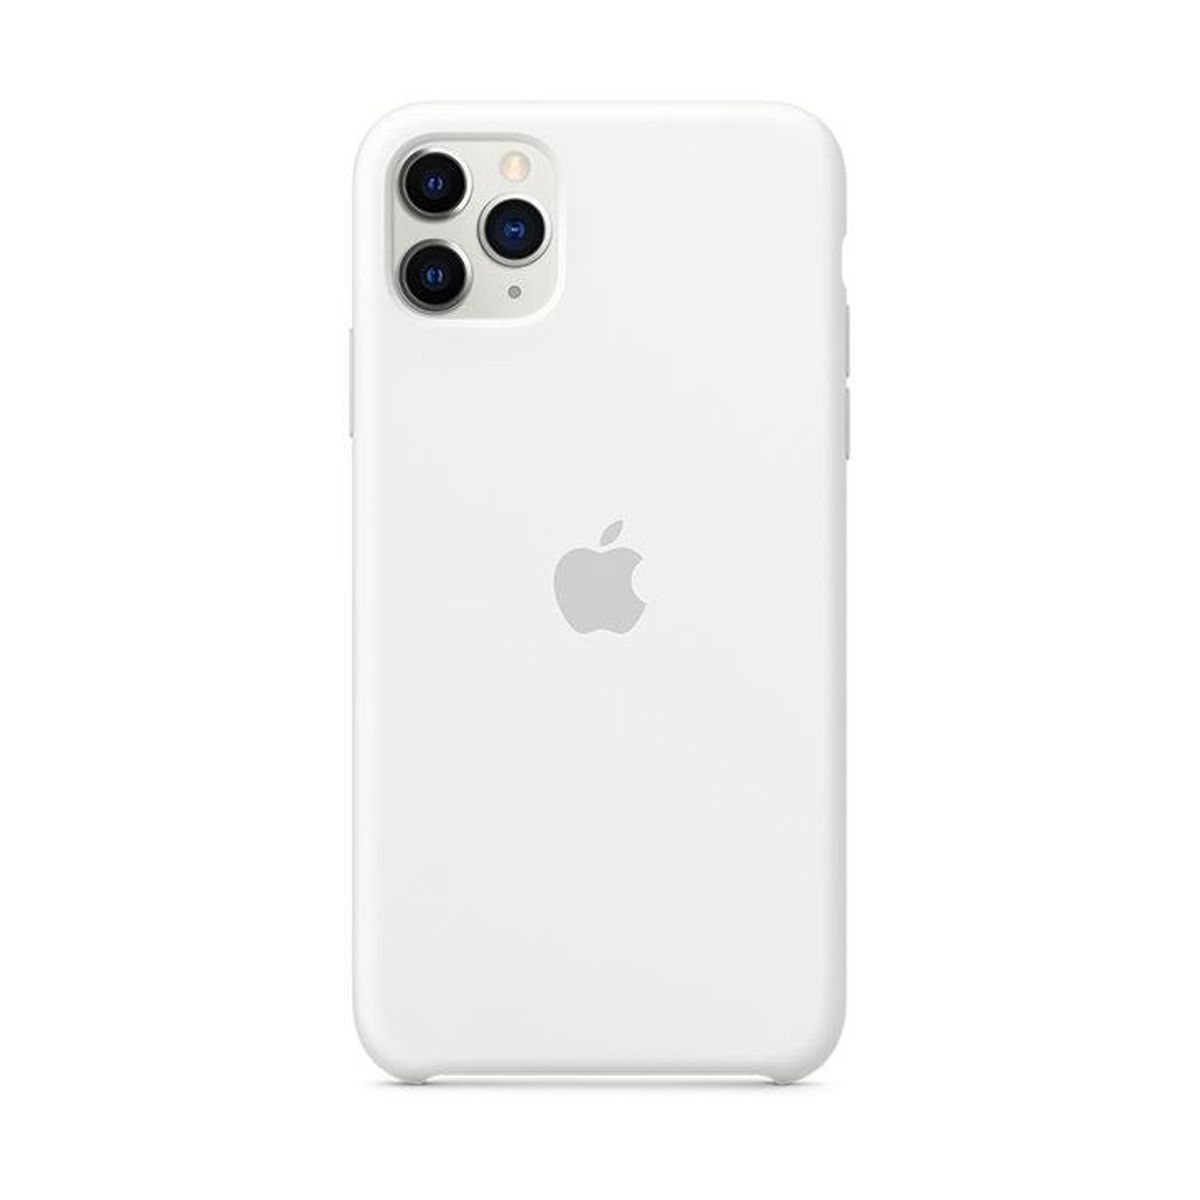 Capa iPhone 11 Pro Max Apple, Silicone Branco - MWYX2ZM/A - Ibyte